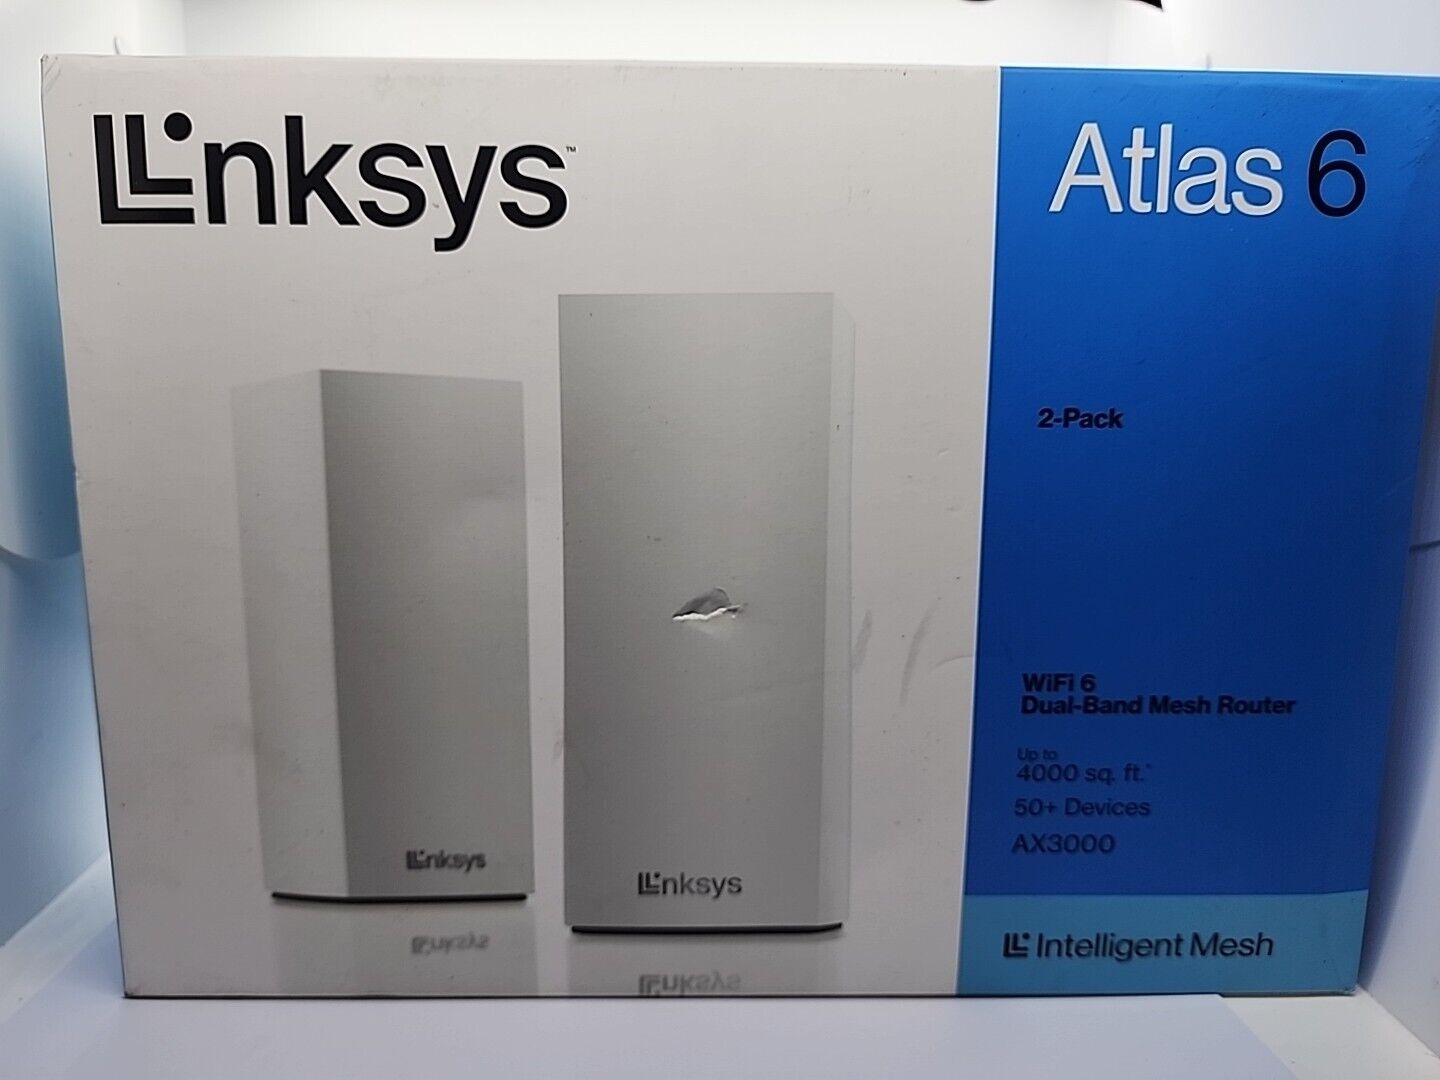 Linksys Atlas 6 AX3000 MX2002 Wi-Fi 6 Dual-Band Mesh Router System 2 Pack